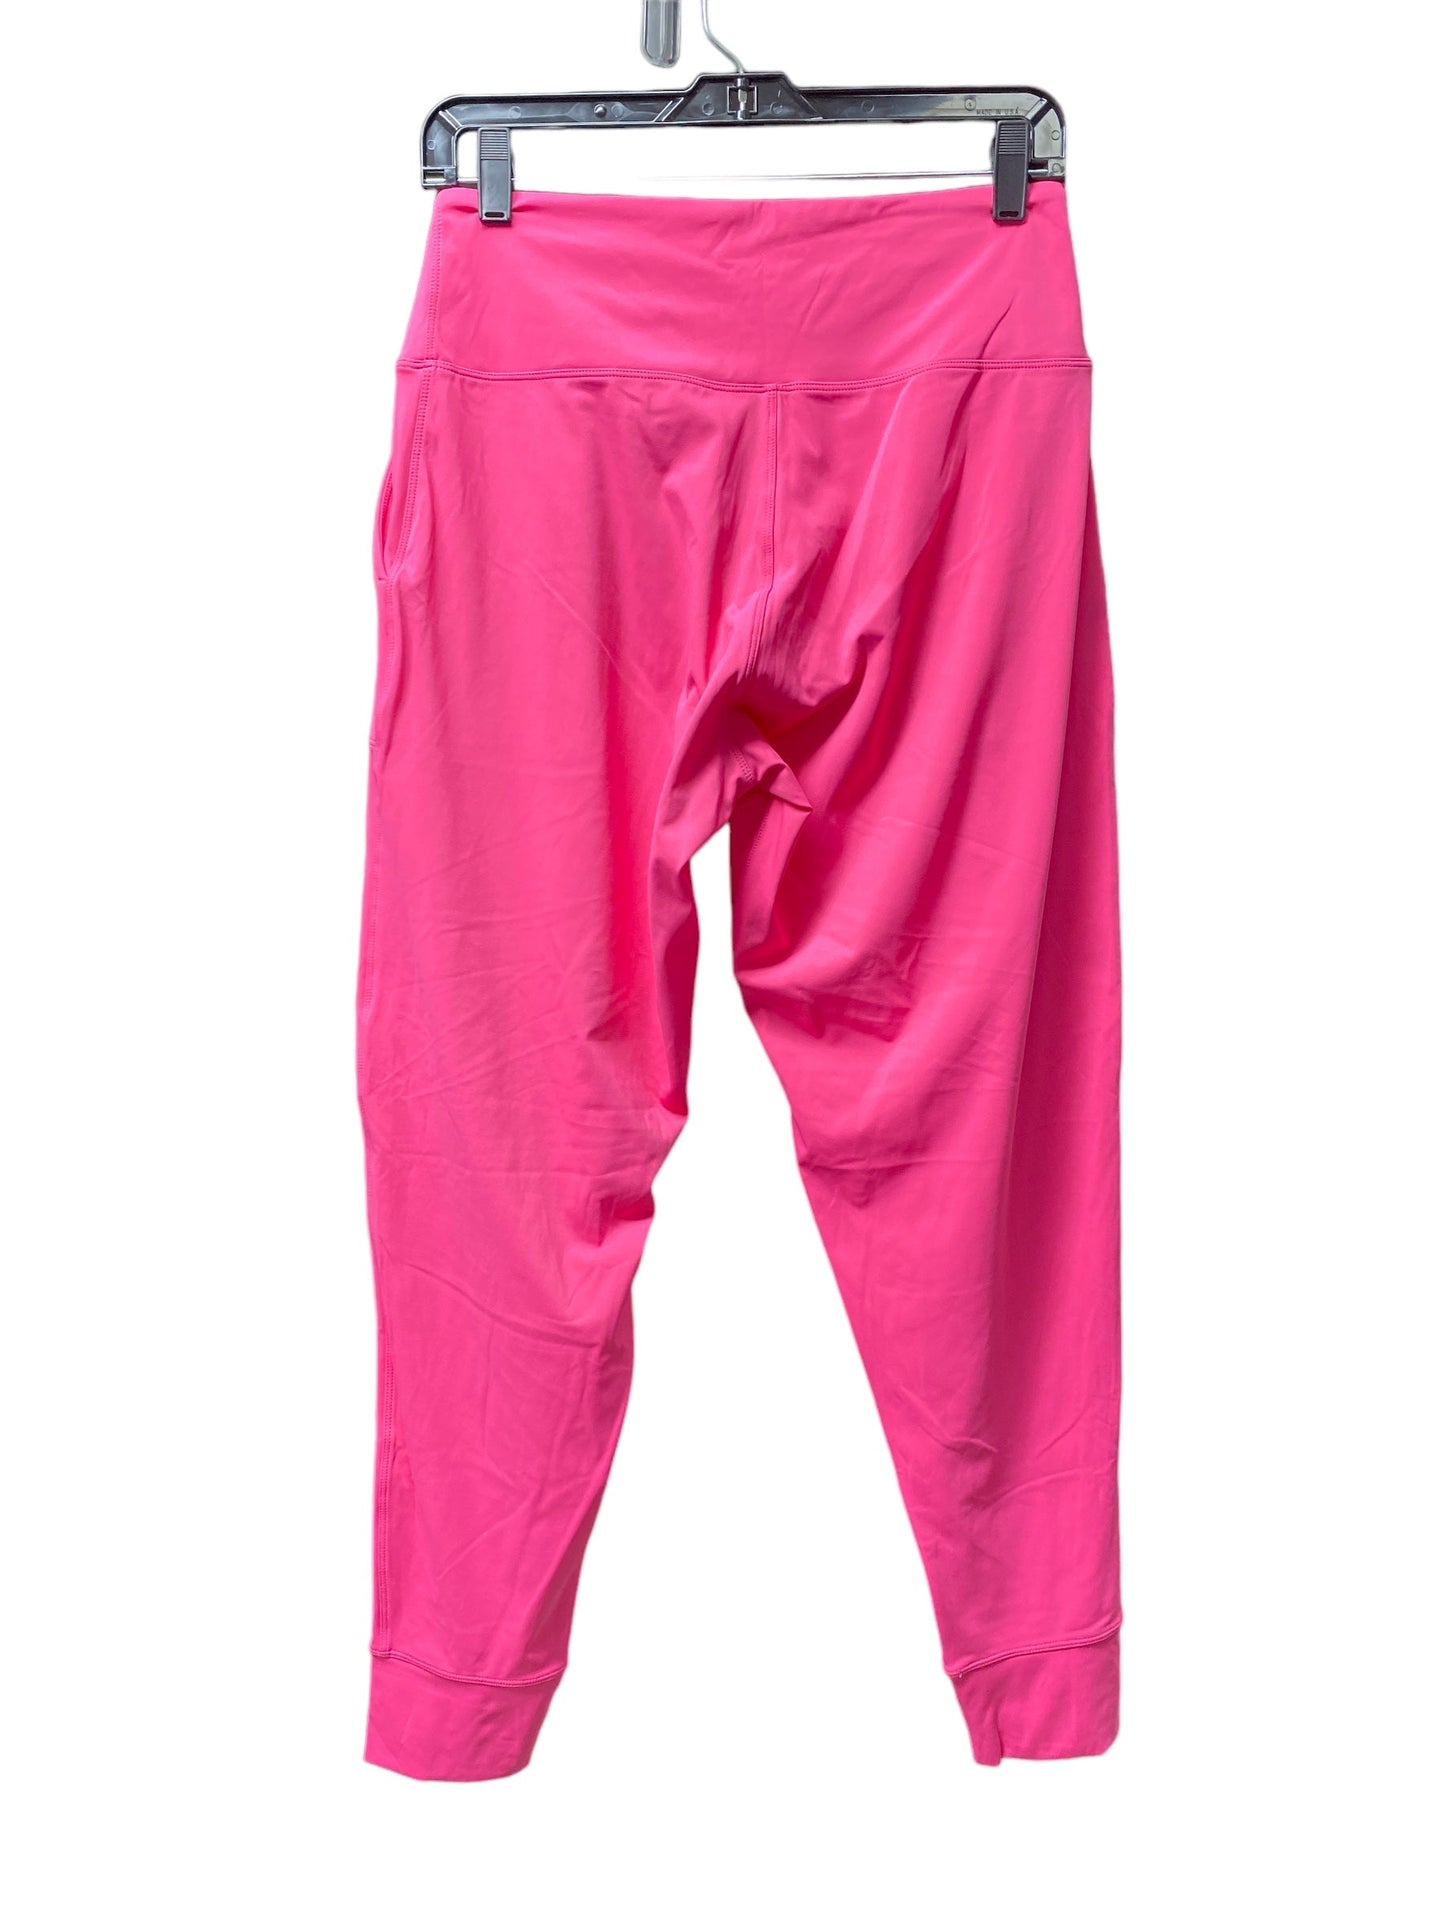 Pink Athletic Leggings The Gym People, Size M